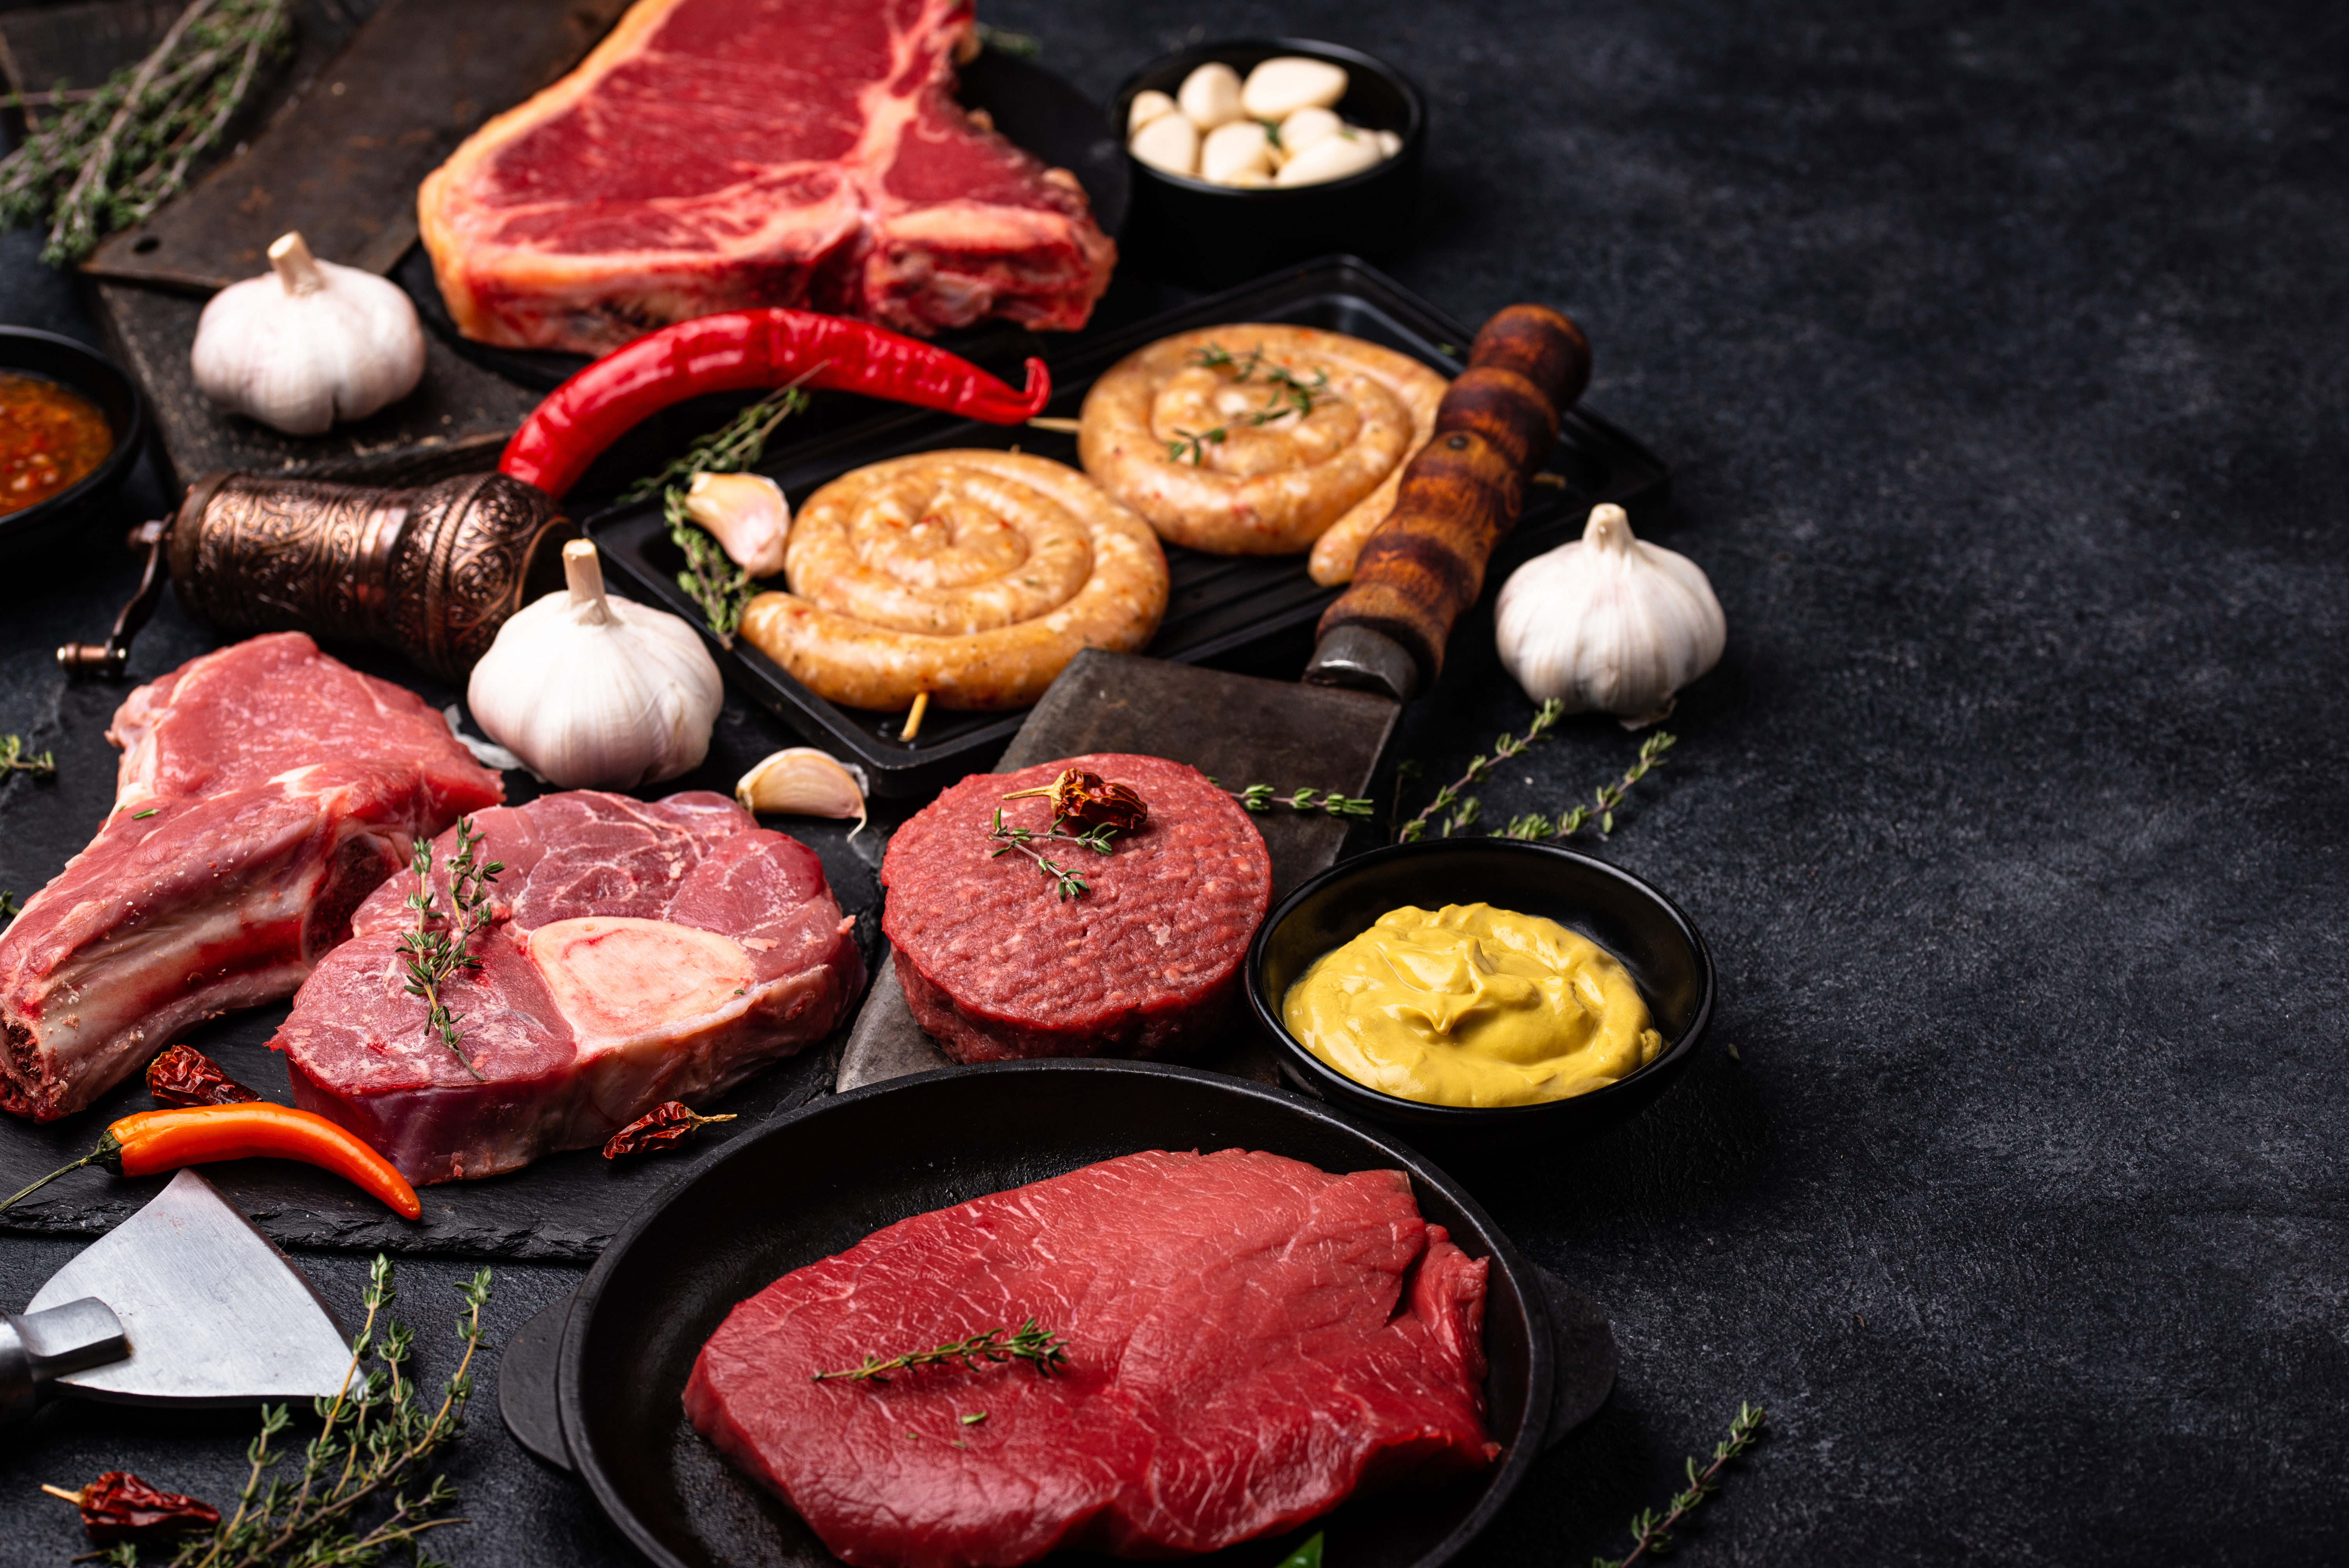 Assortment of various types of meat